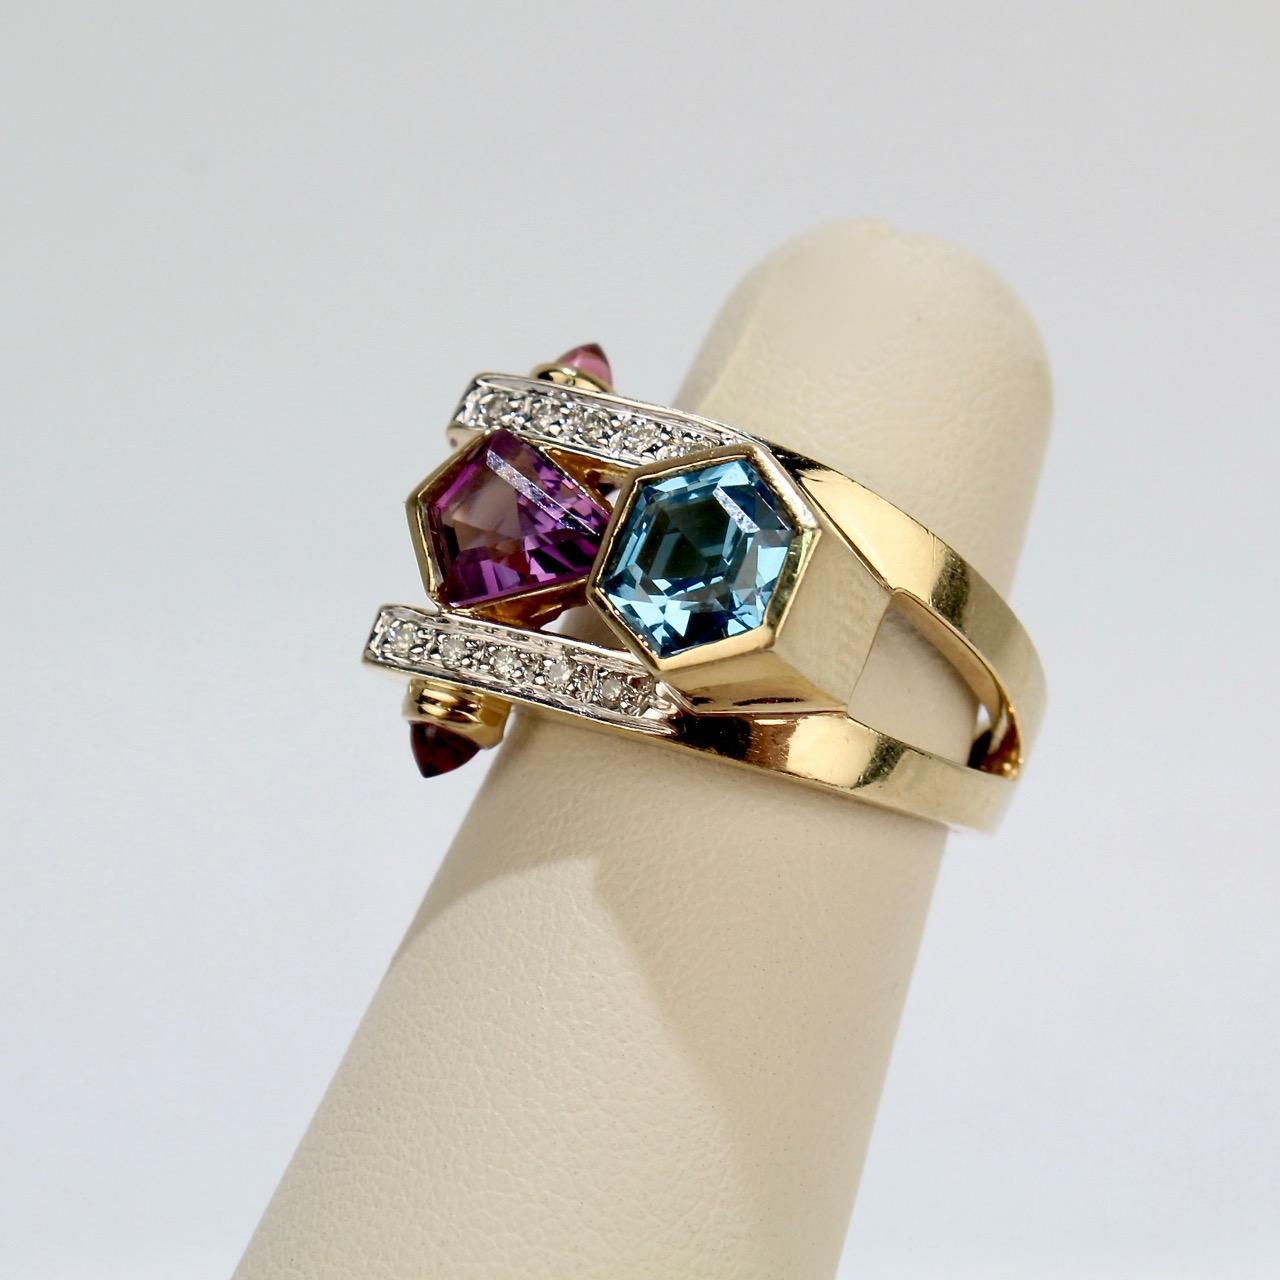 A fine modernist ring by Frank Ellman.

Having a split shank and set with a hexagonal blue topaz, a free-form amethyst, 10 accent diamonds, and flanked by 2 small amethyst cabochons. 

The shank is stamped 14K and 'Ellm' for Frank Ellman.

Ring